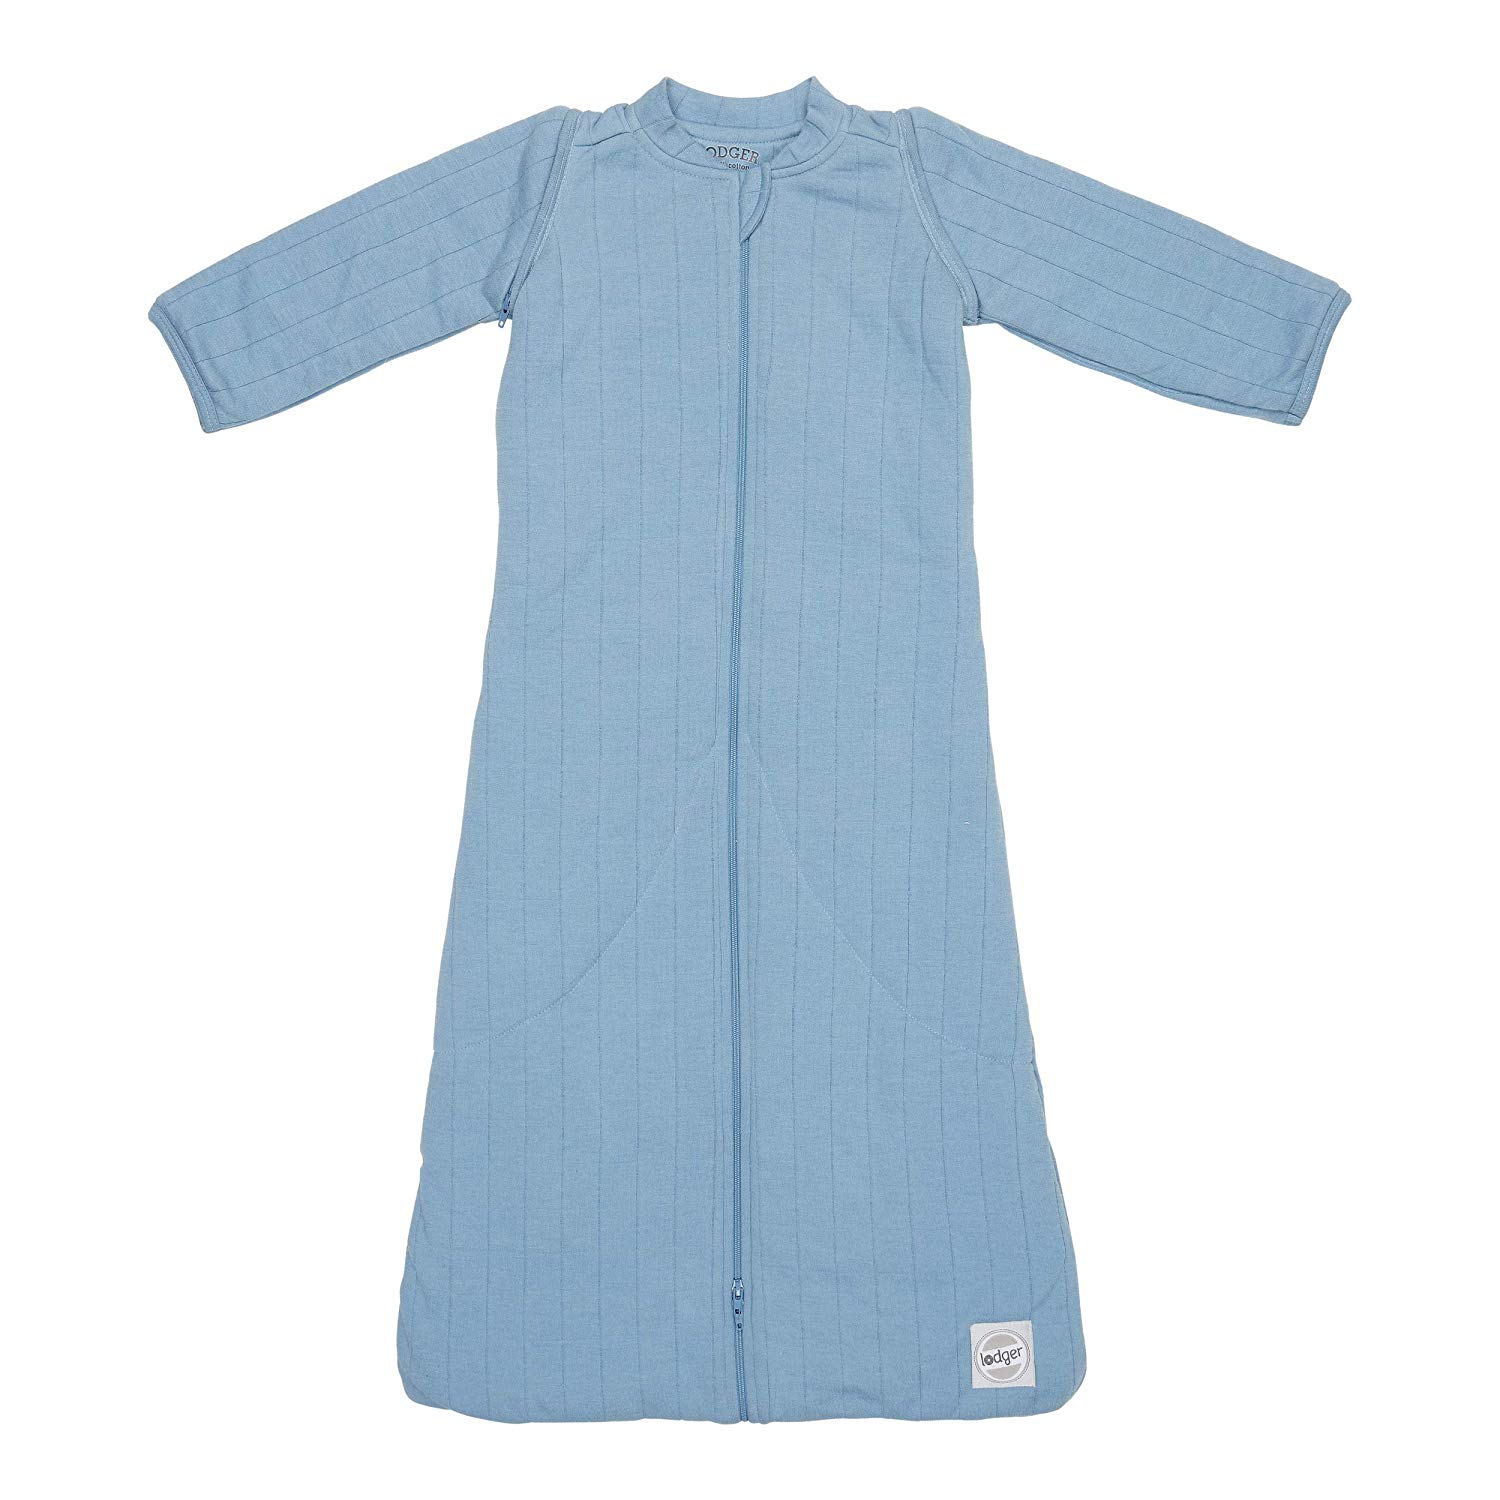 Lodger Hopper Baby Sleeping Bag with Sleeves 86/98